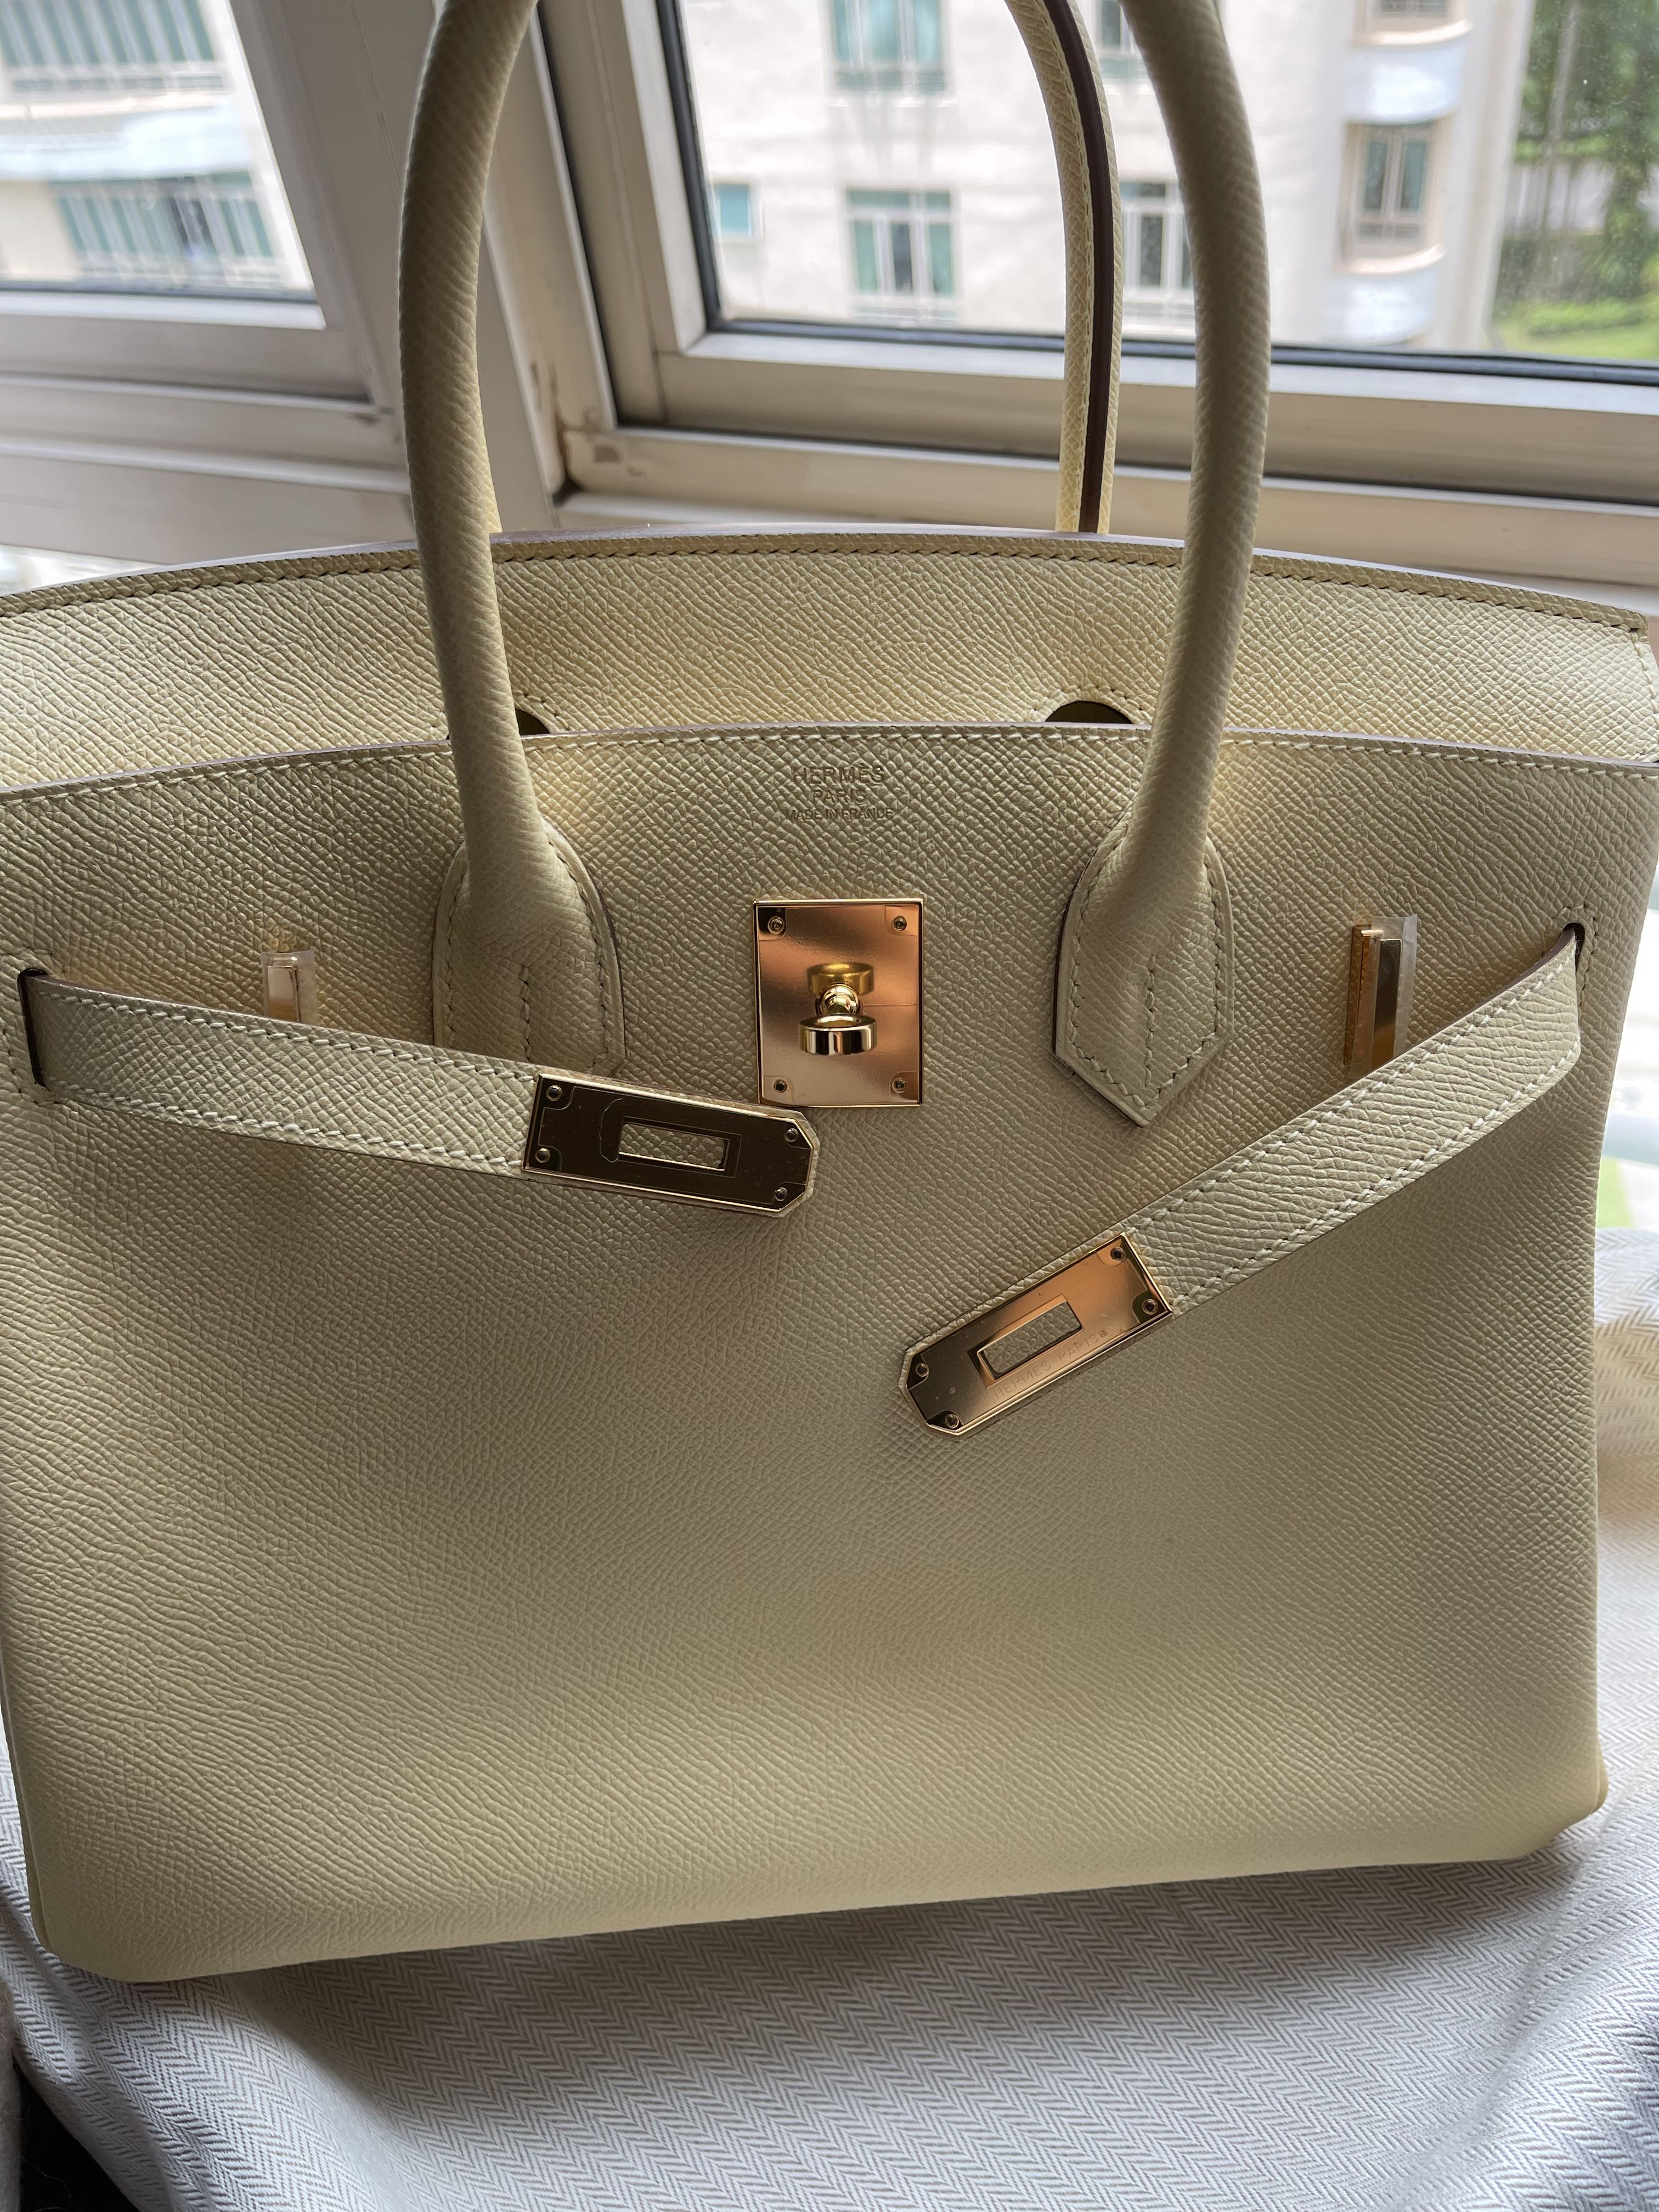 Hermès introduces 5 new Birkins — and 1 that comes riddled with